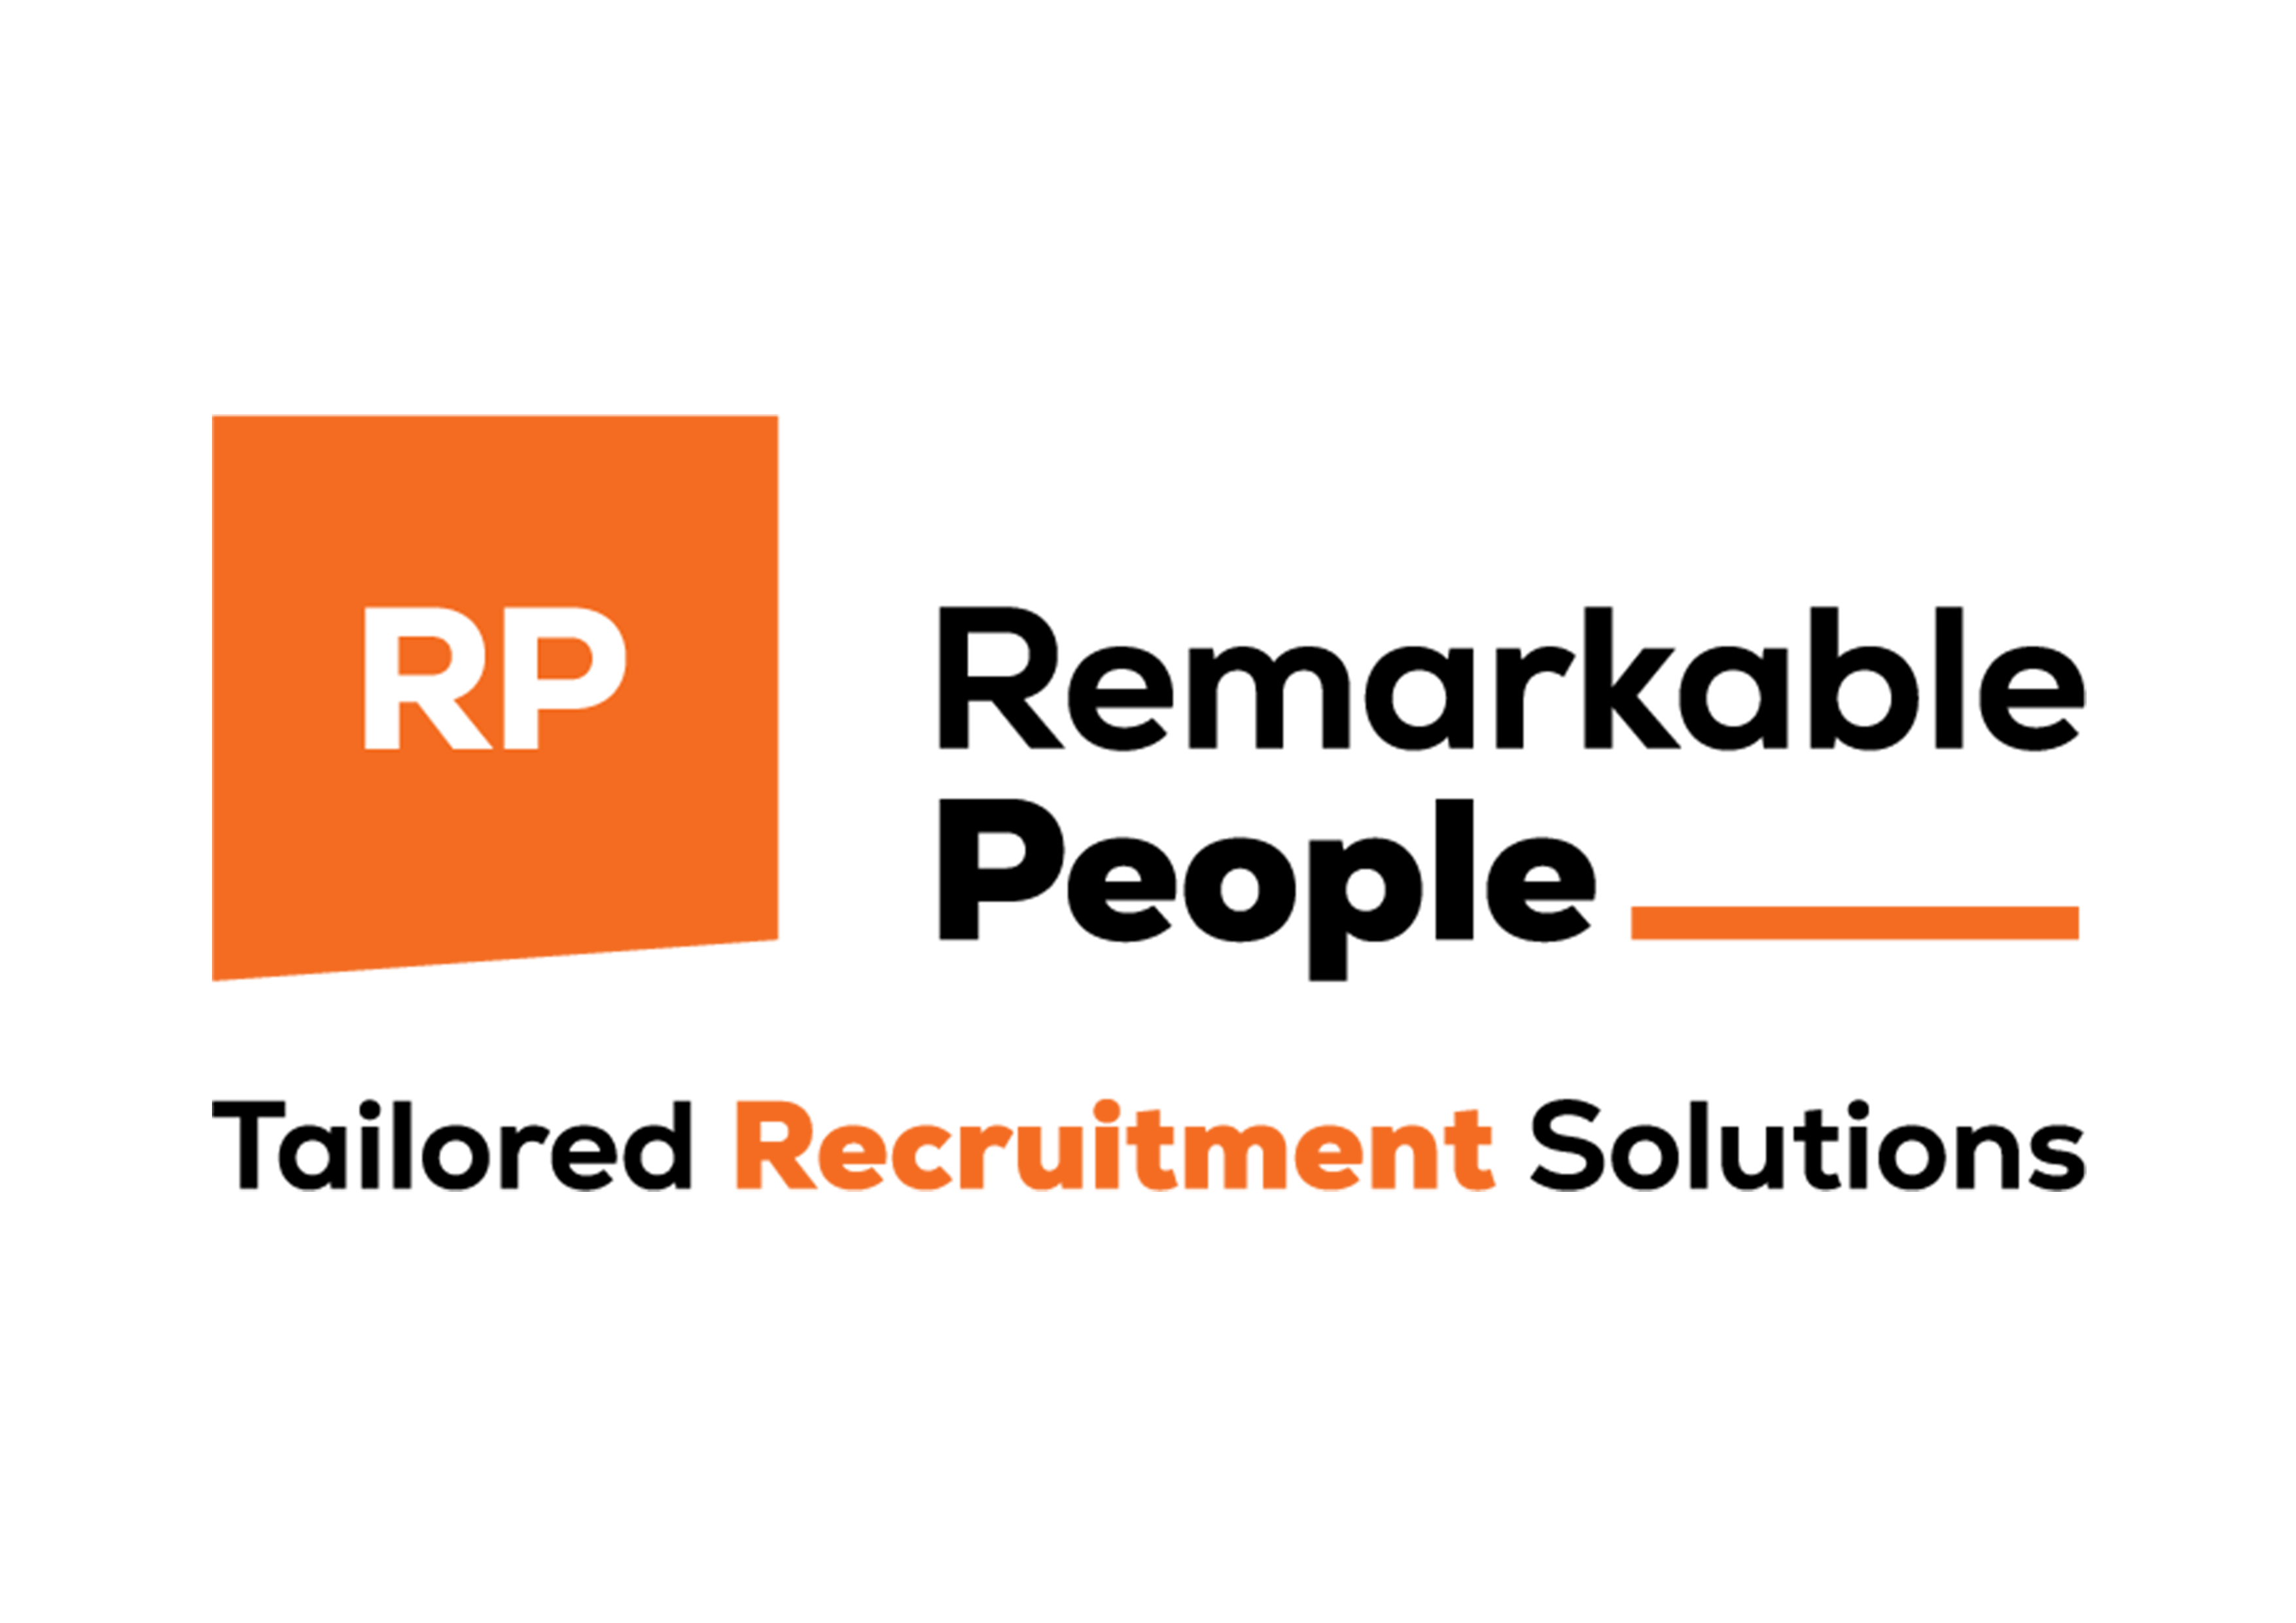 Remarkable People Recruitment